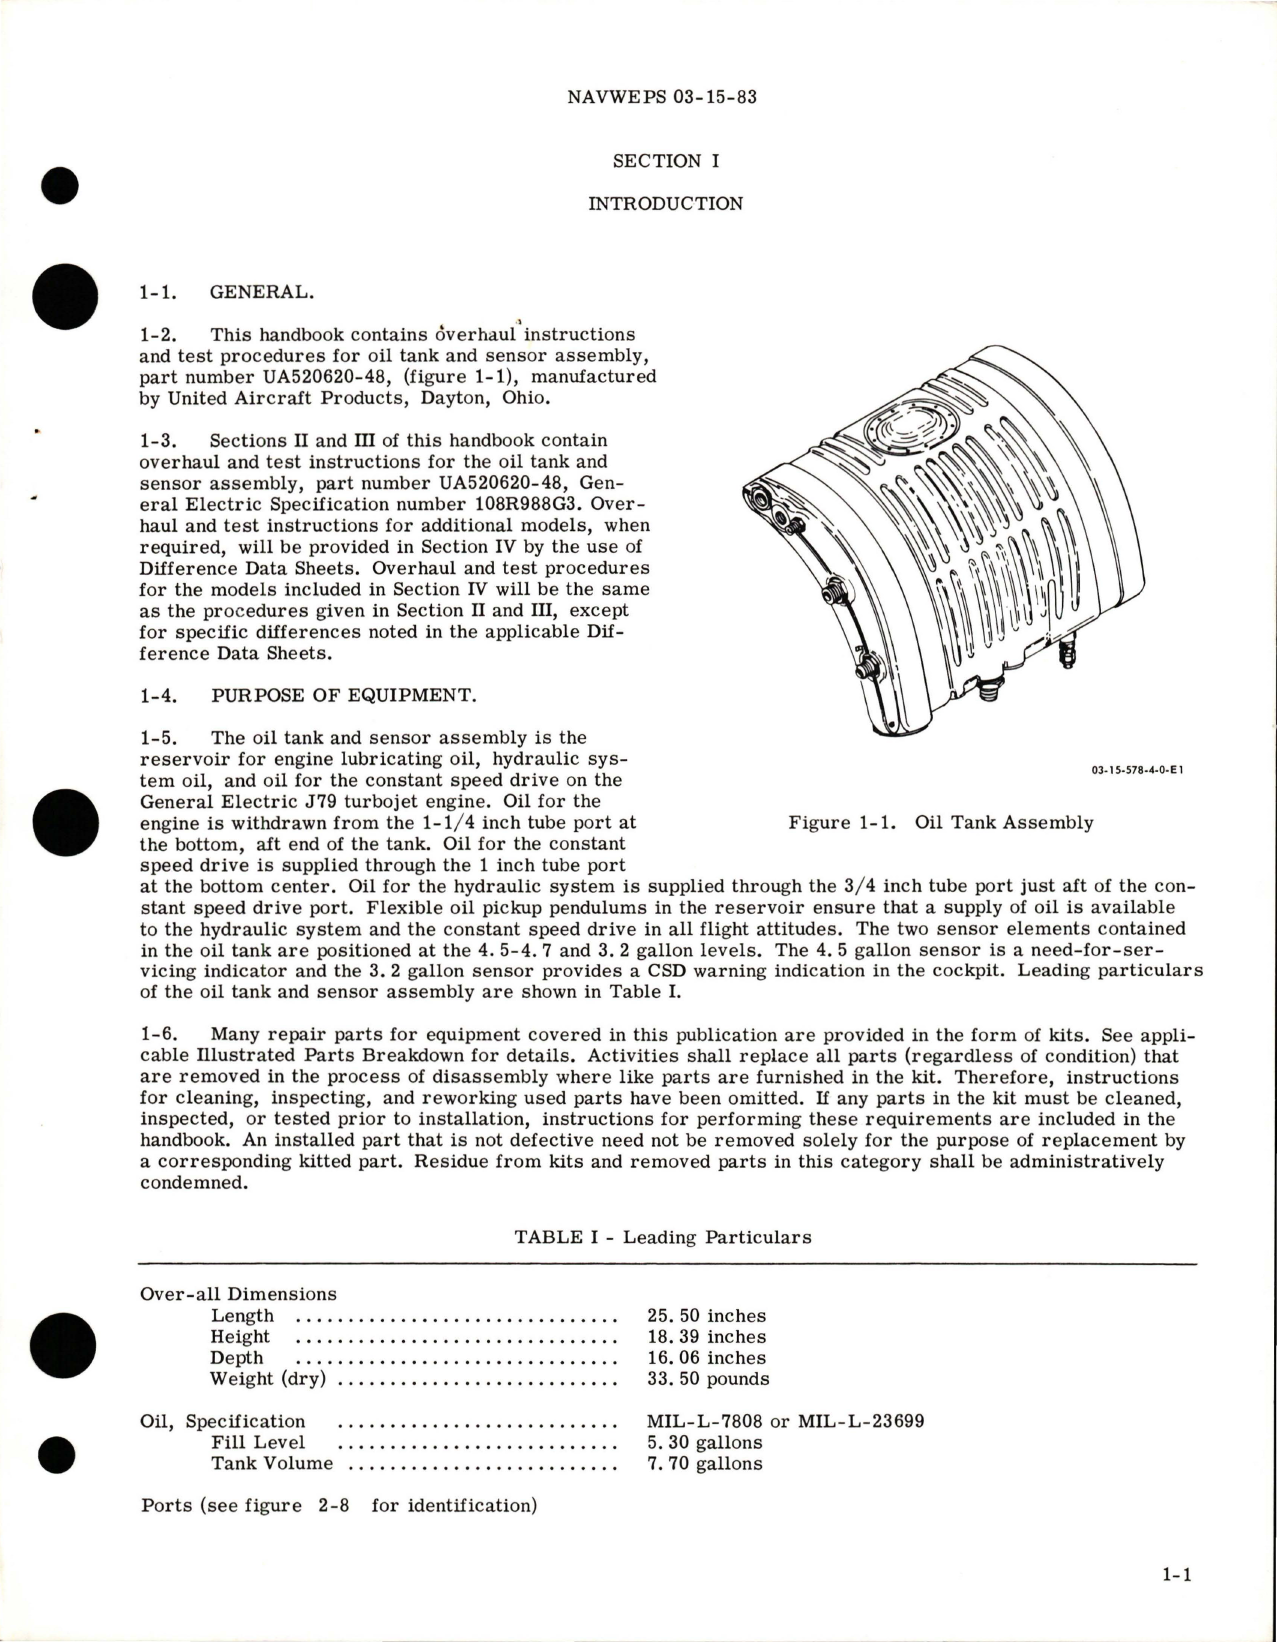 Sample page 5 from AirCorps Library document: Overhaul for Oil Tank and Sensor Assembly